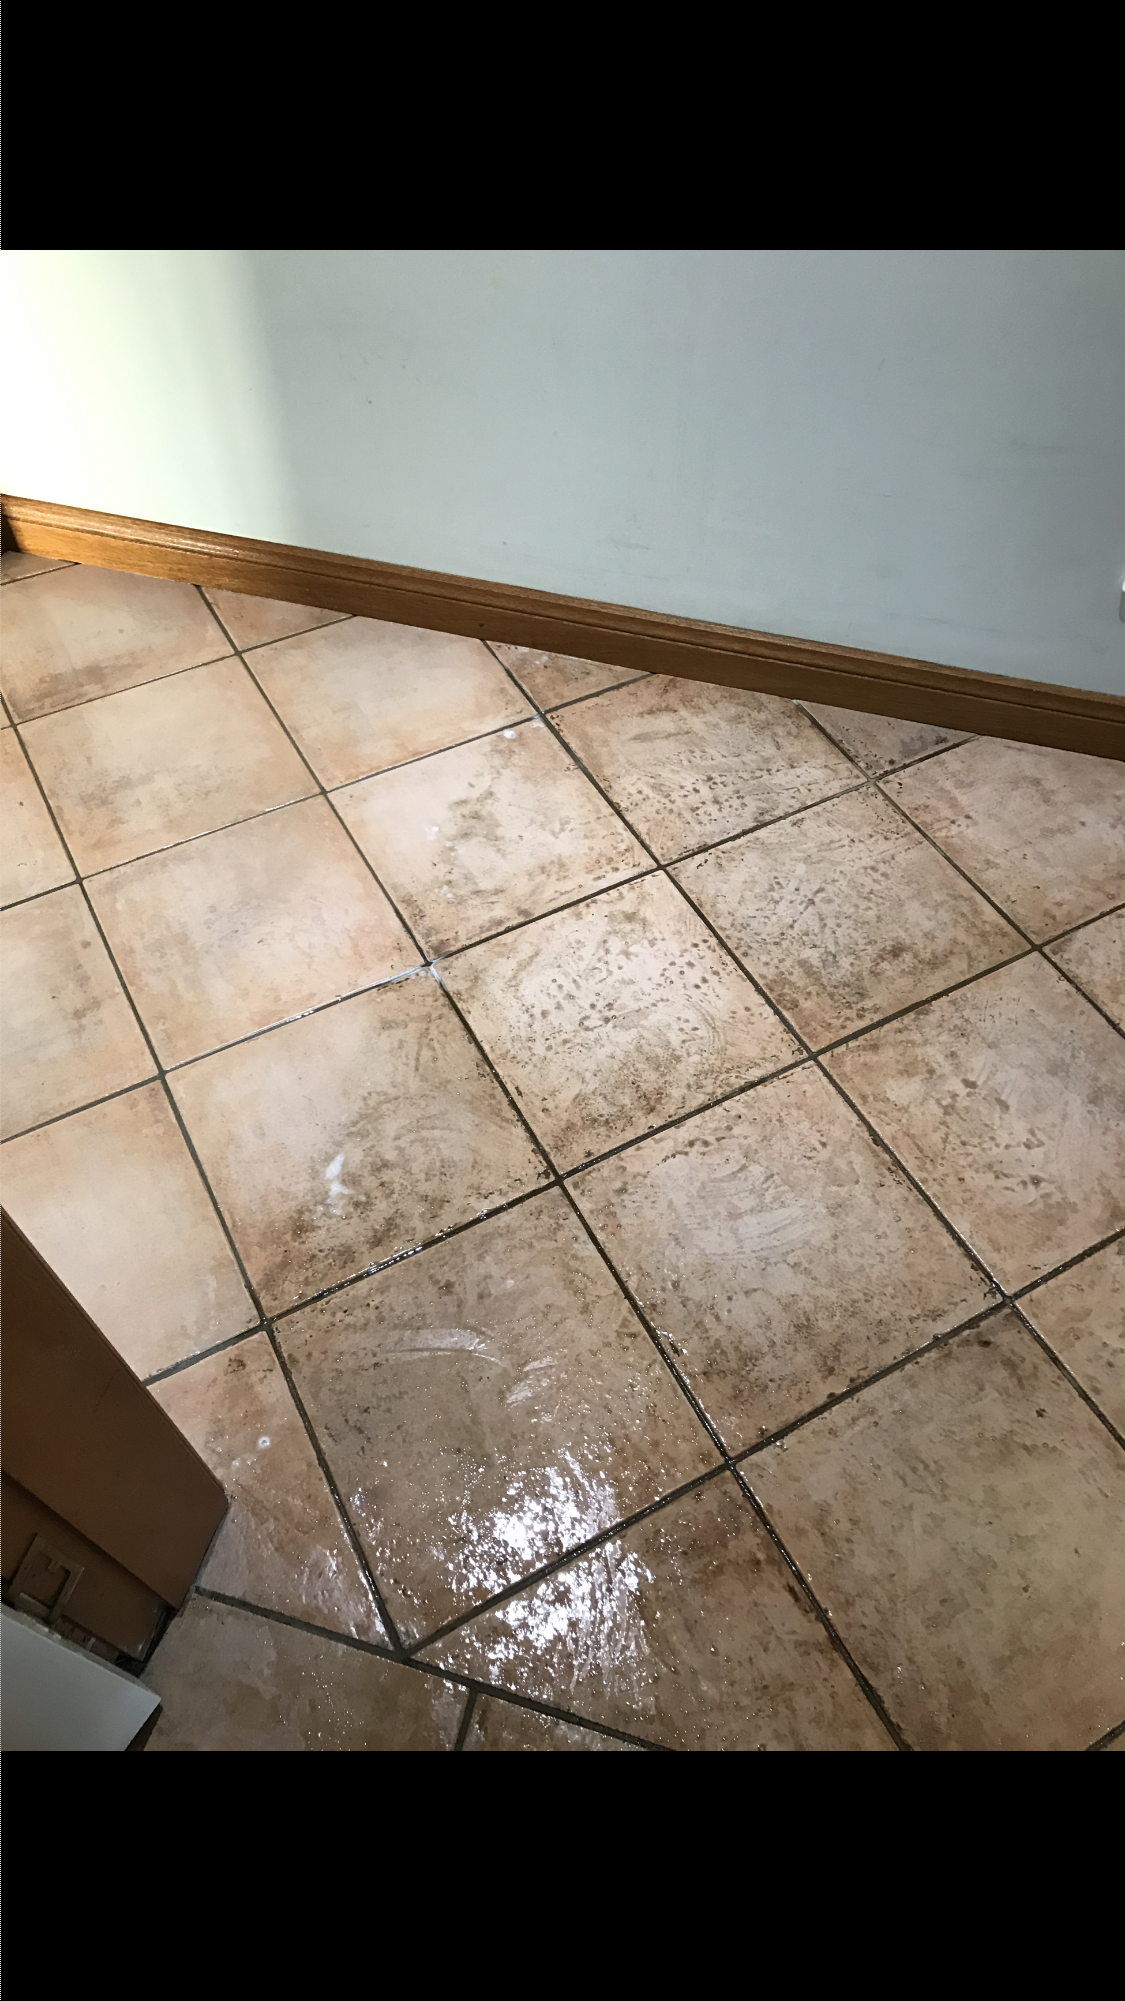 tile and grout cleaning in progress, Shellharbour